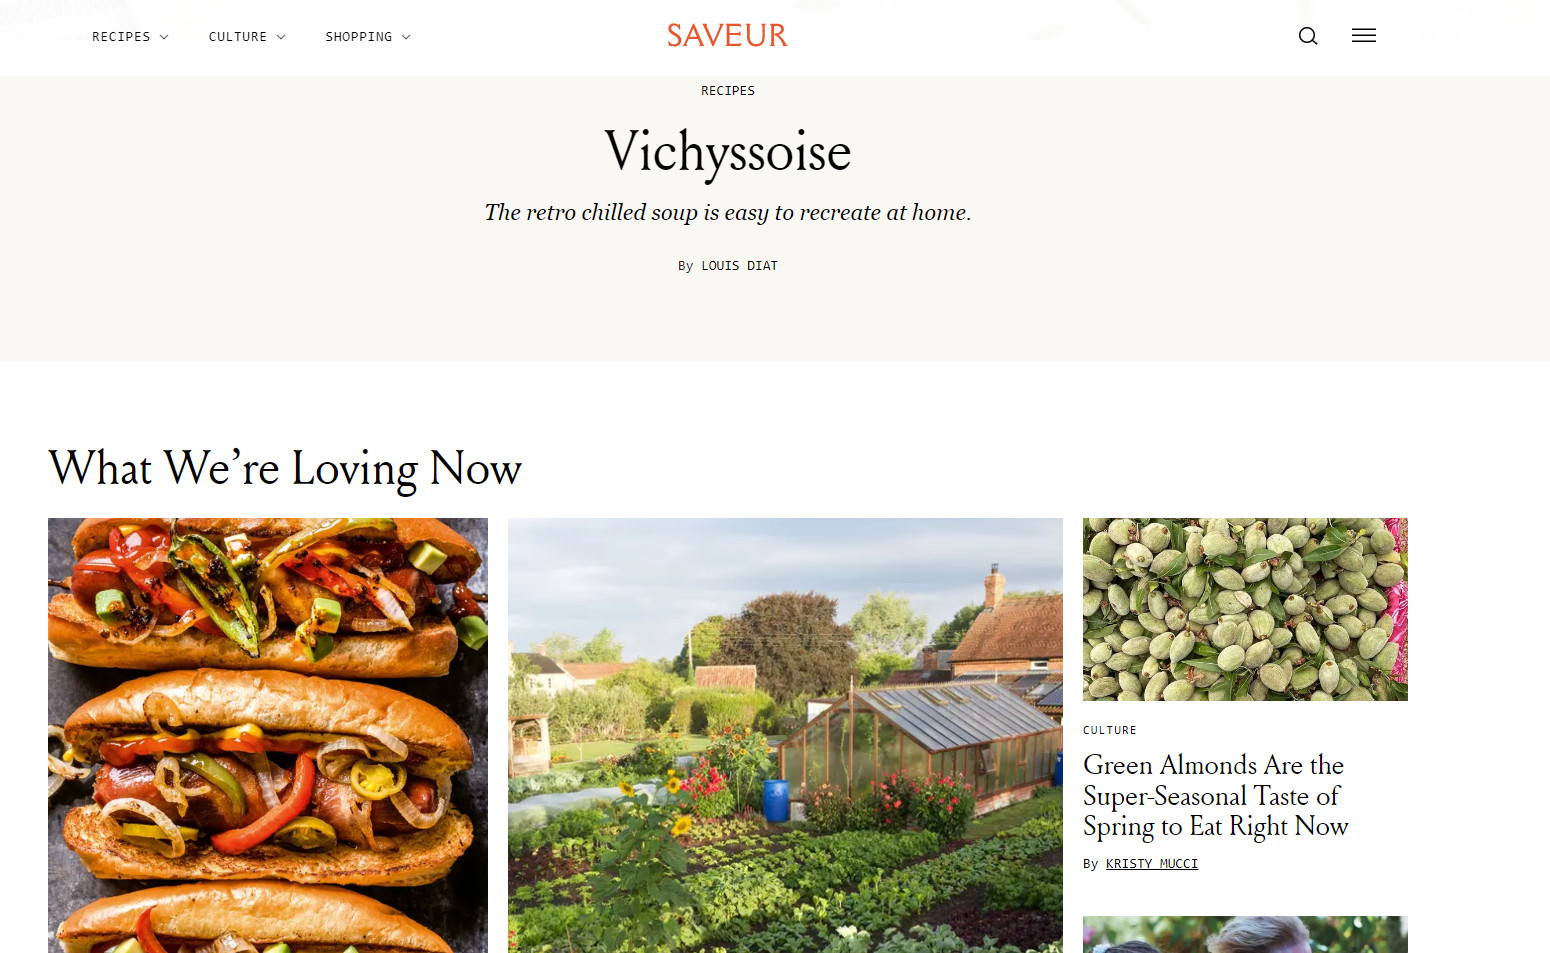  Saveur is by far the best recipe blog for some of the most exquisite dishes